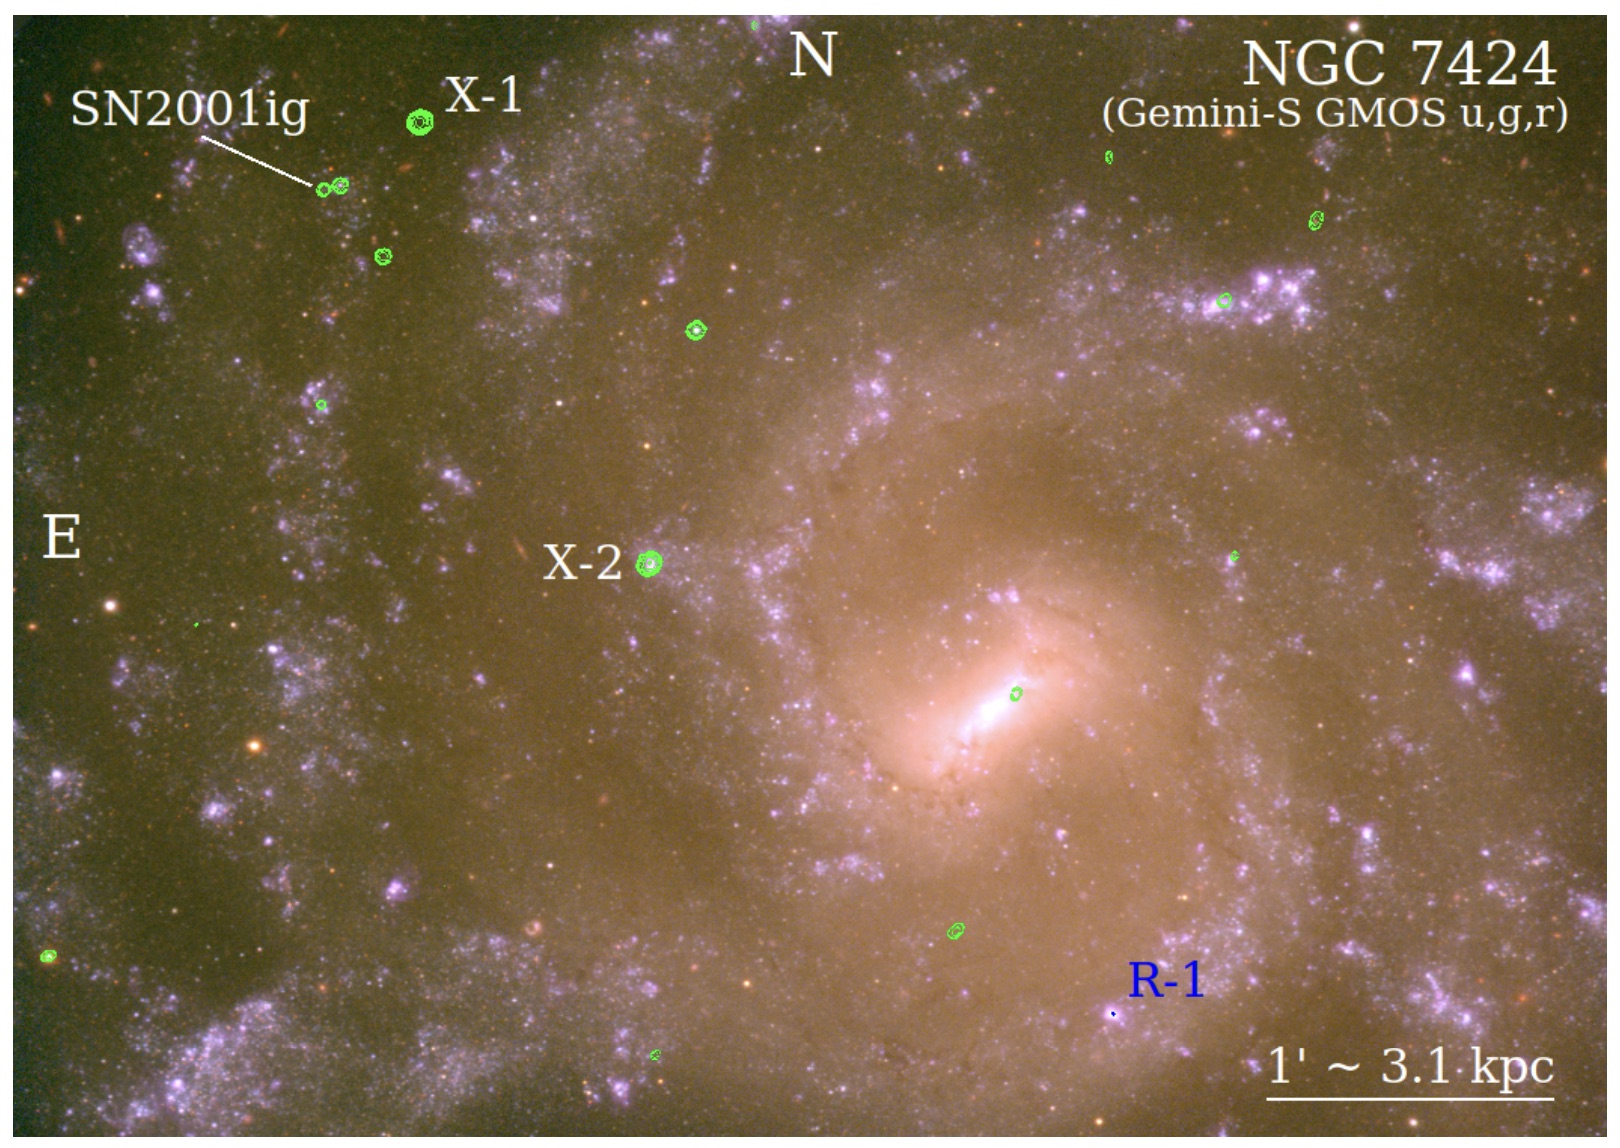 An optical image of the nearby galaxy NGC 7424 with the brightest X-ray sources overplotted in green and the location of a strong, persistent radio source (R-1) also labelled.